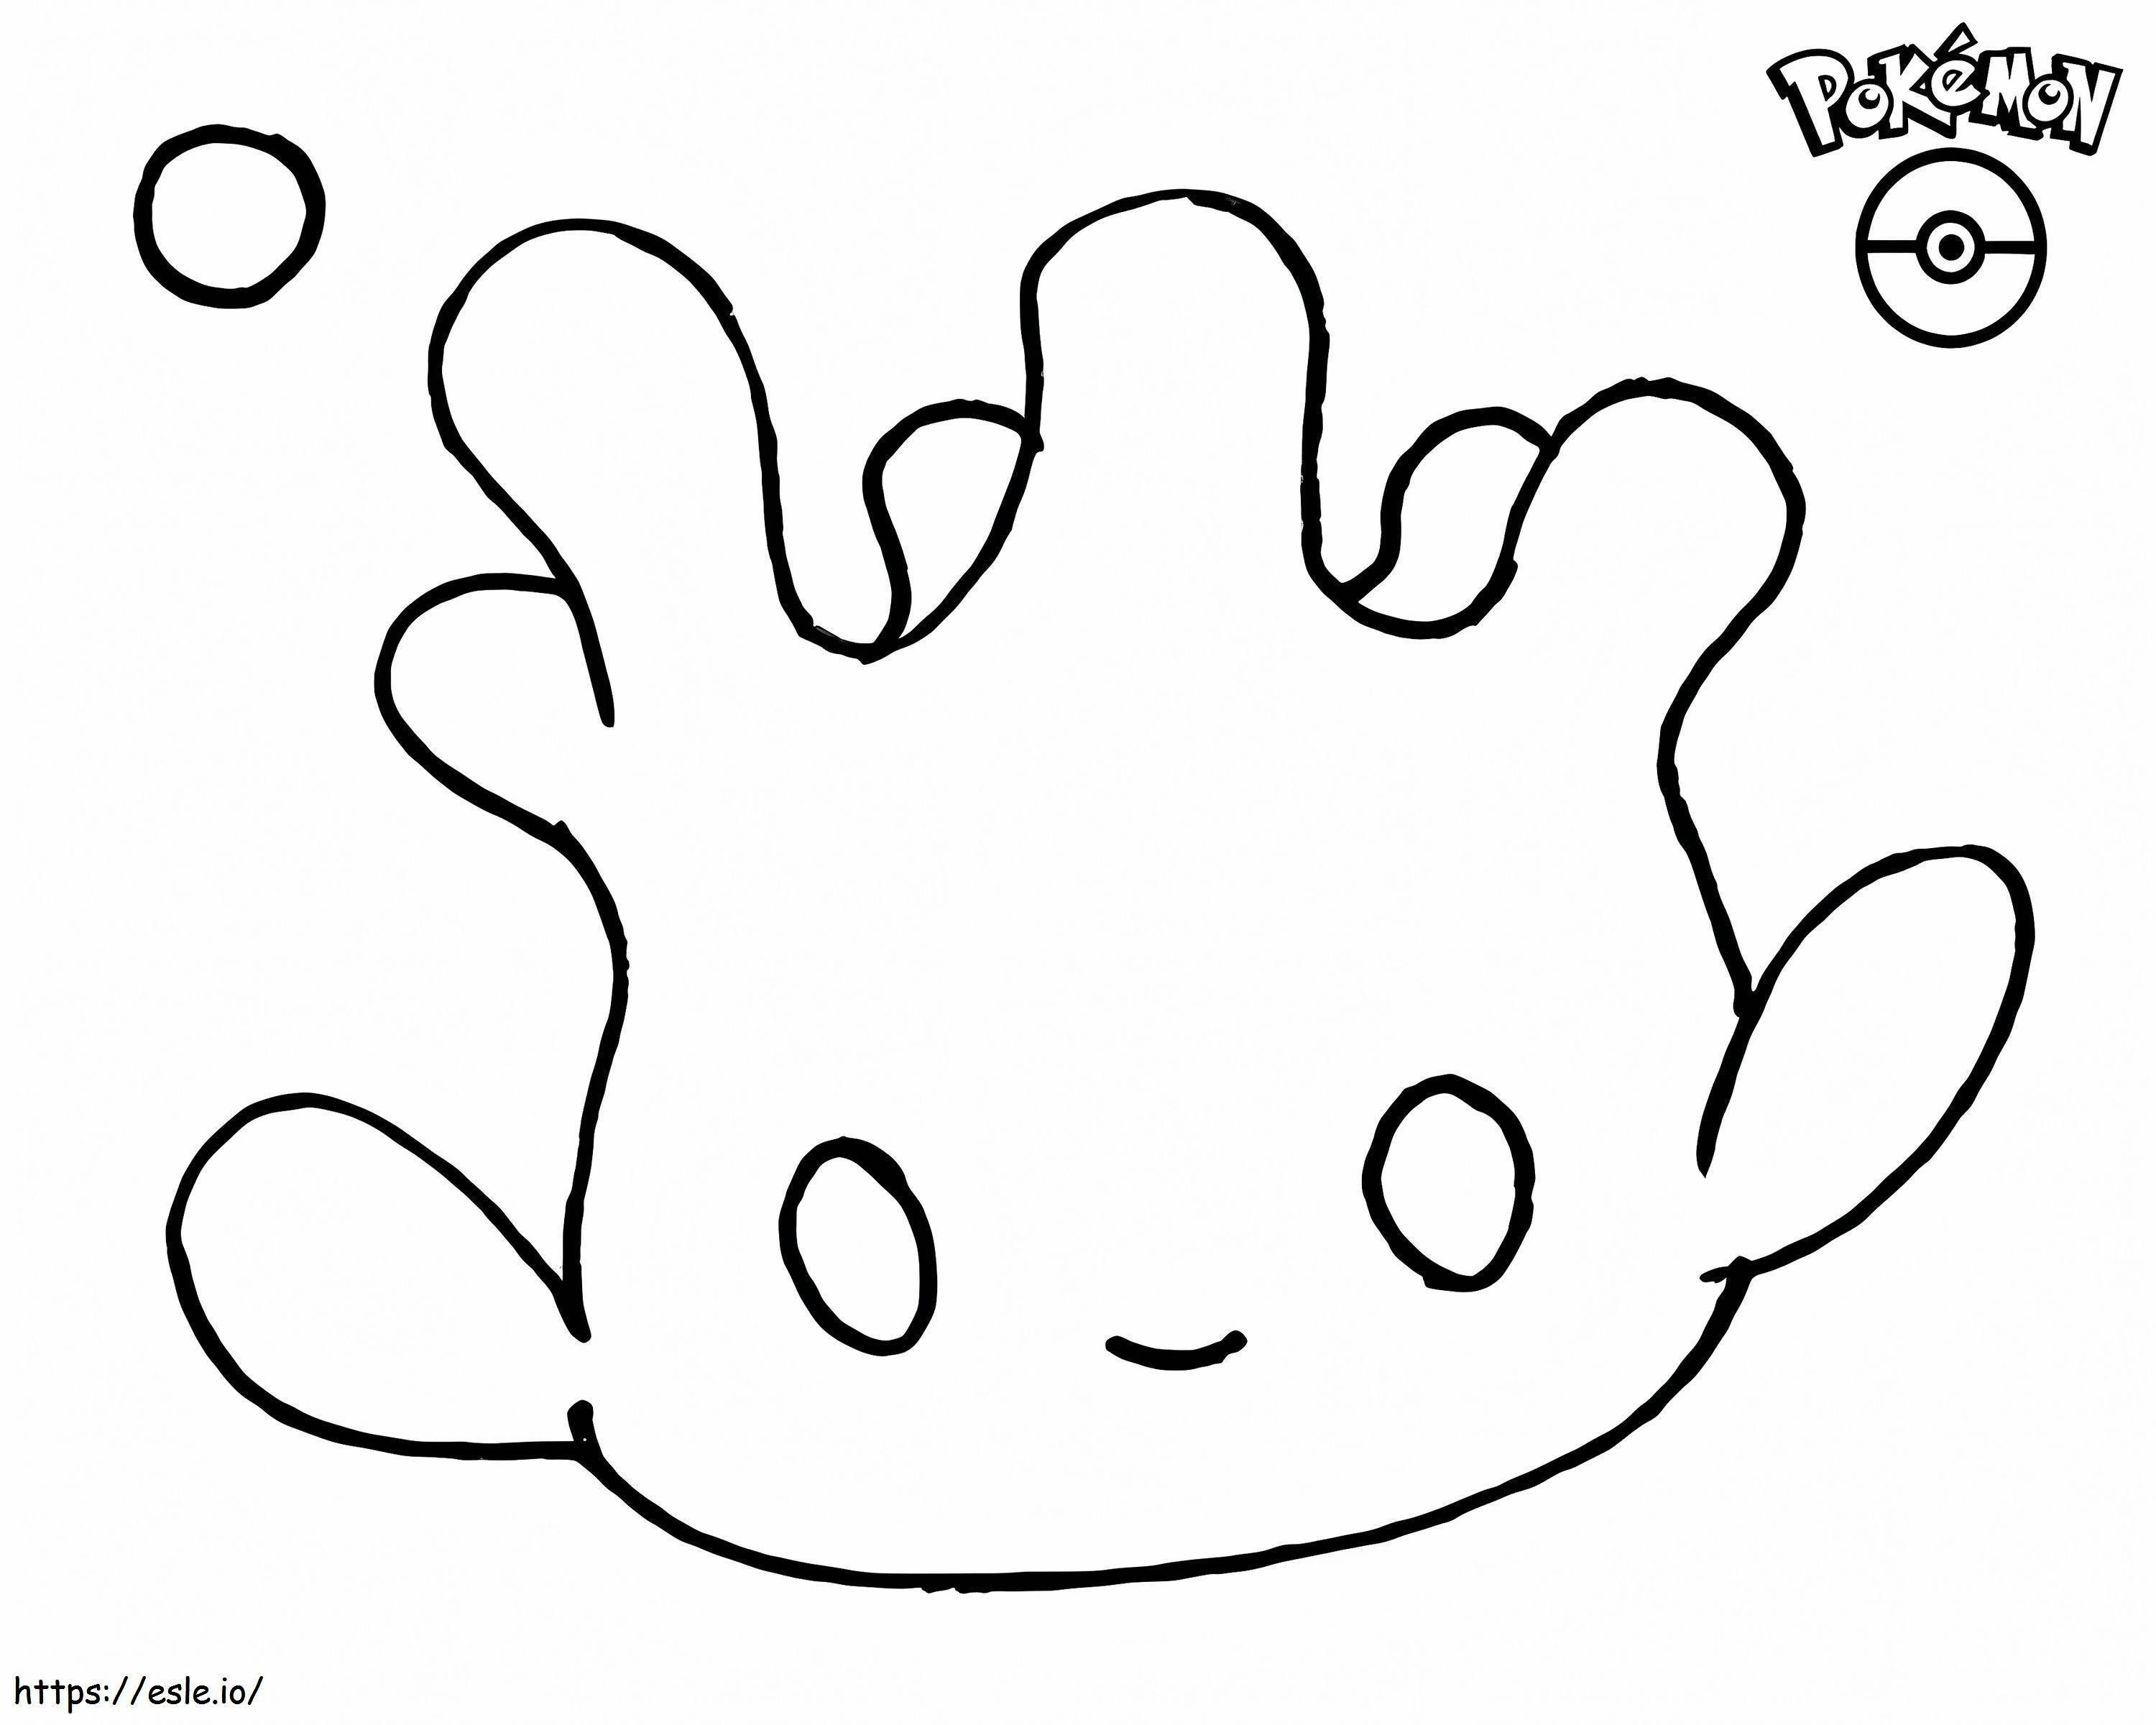 Milcery Pokemon 3 coloring page